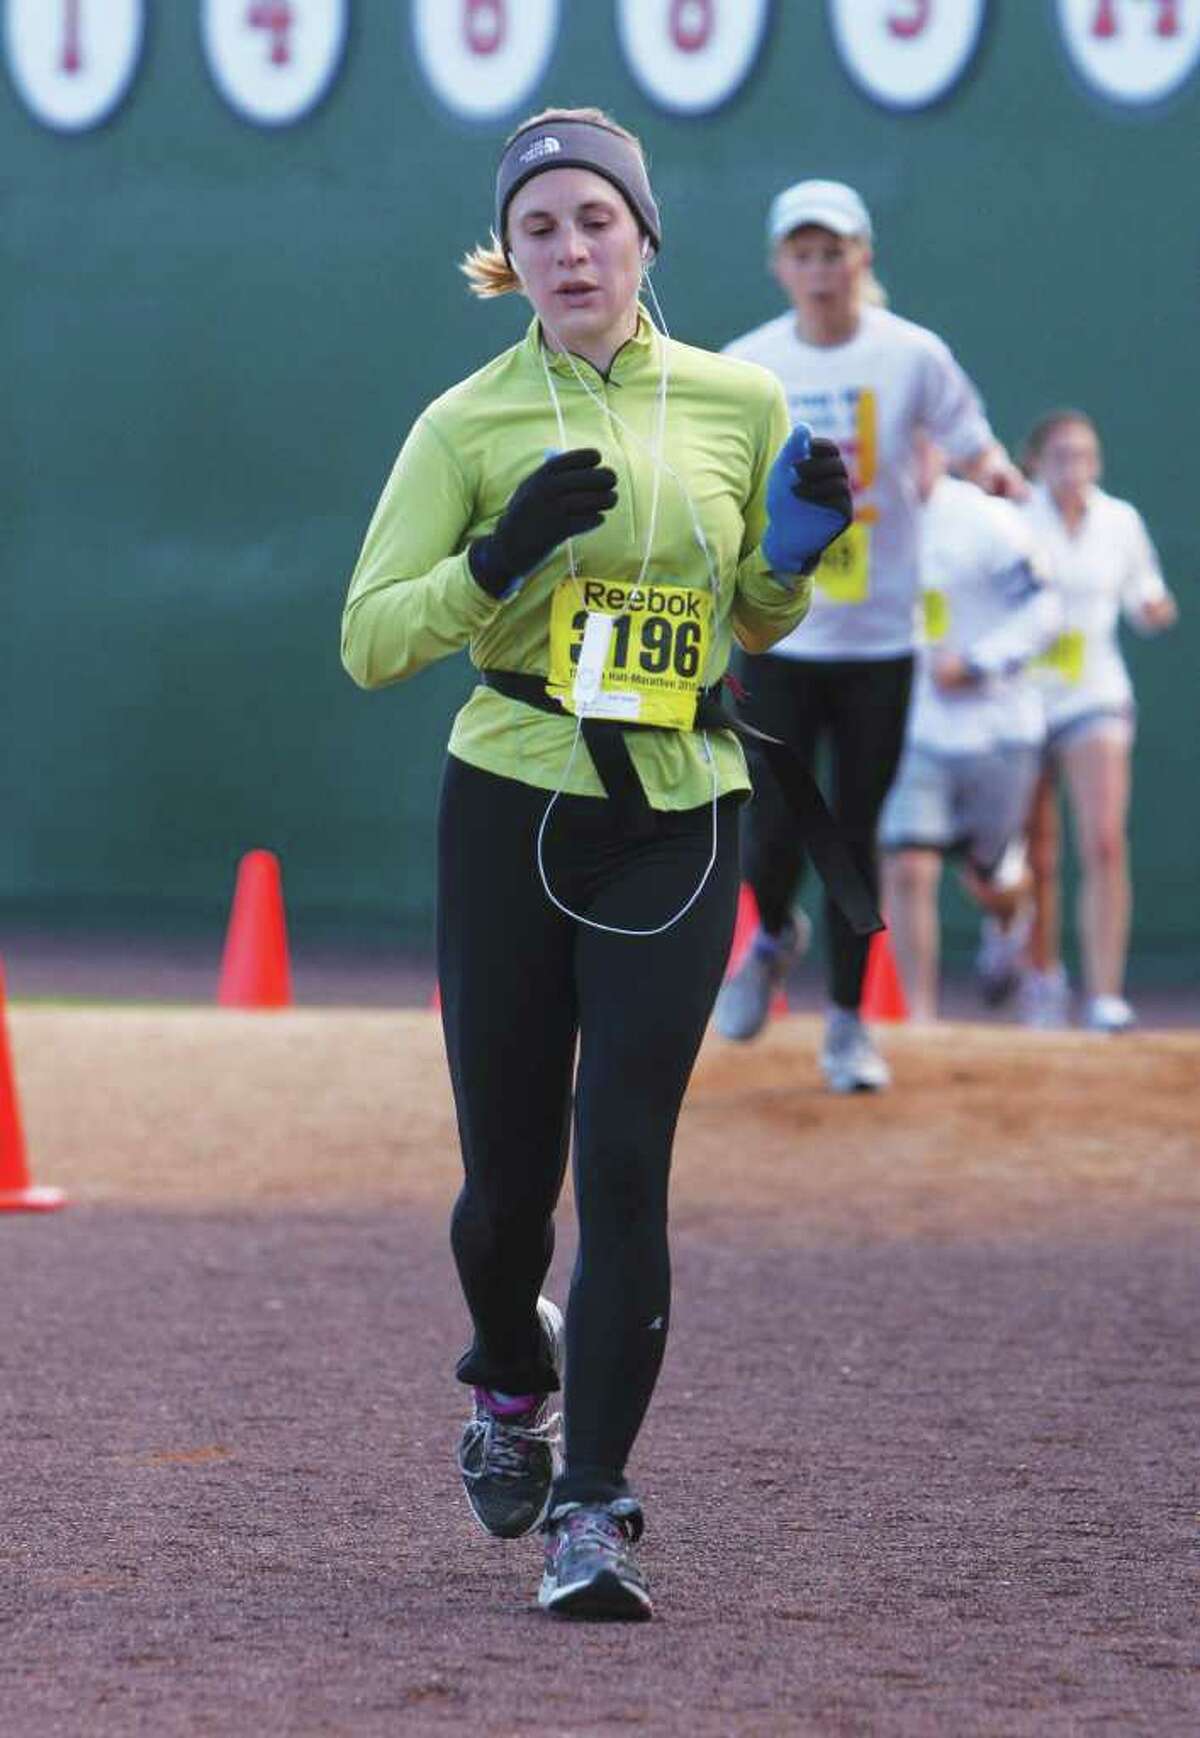 Kerrin Hage, of Sandy Hook, will be competing in her first triathlon in August.